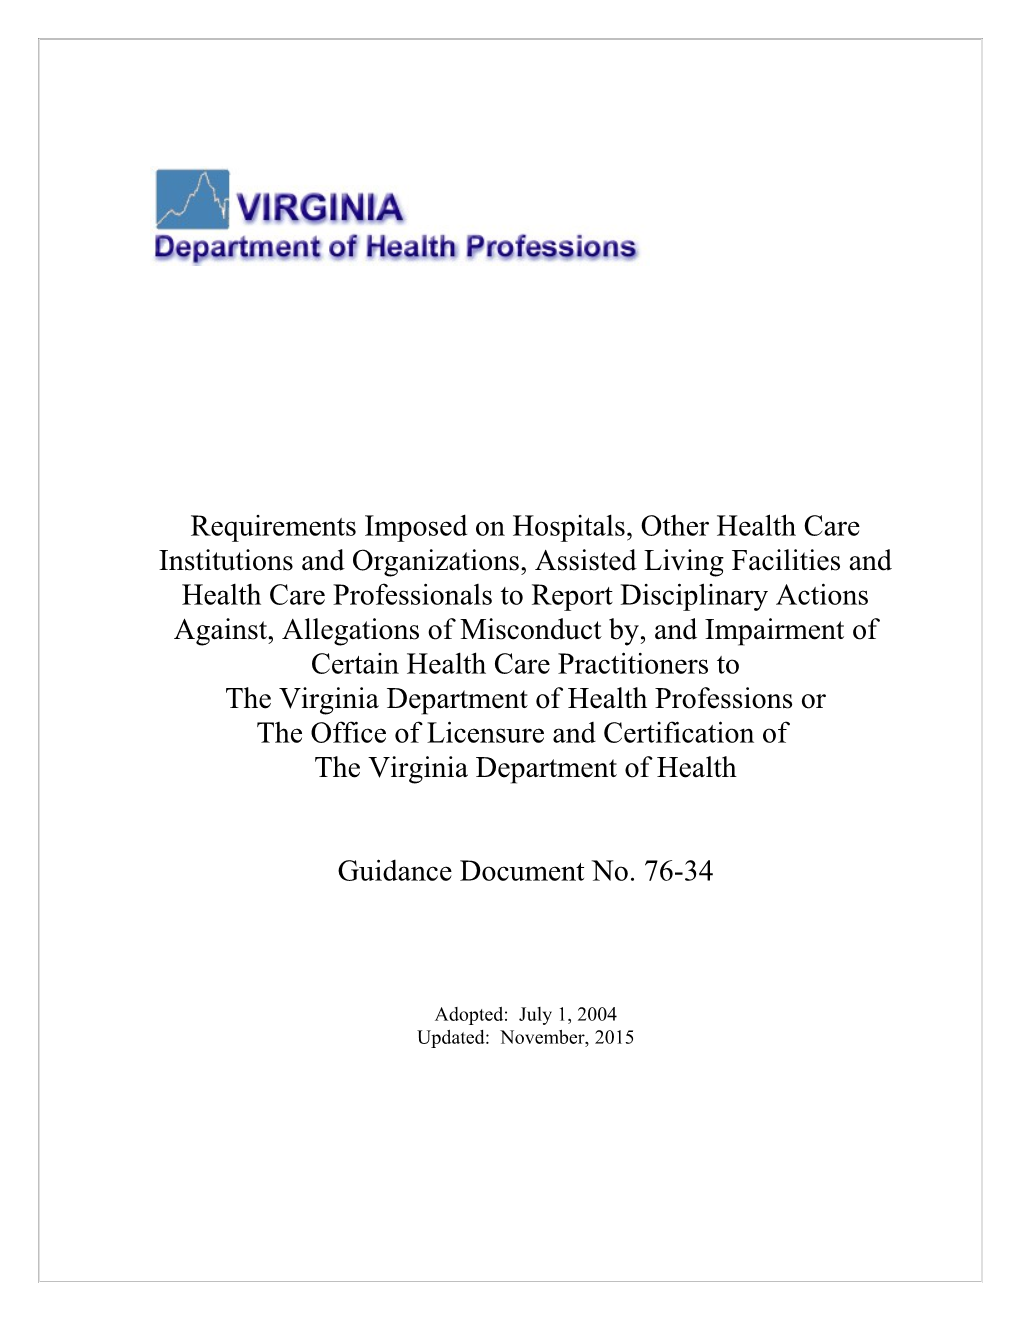 The Virginia Department of Health Professions Or